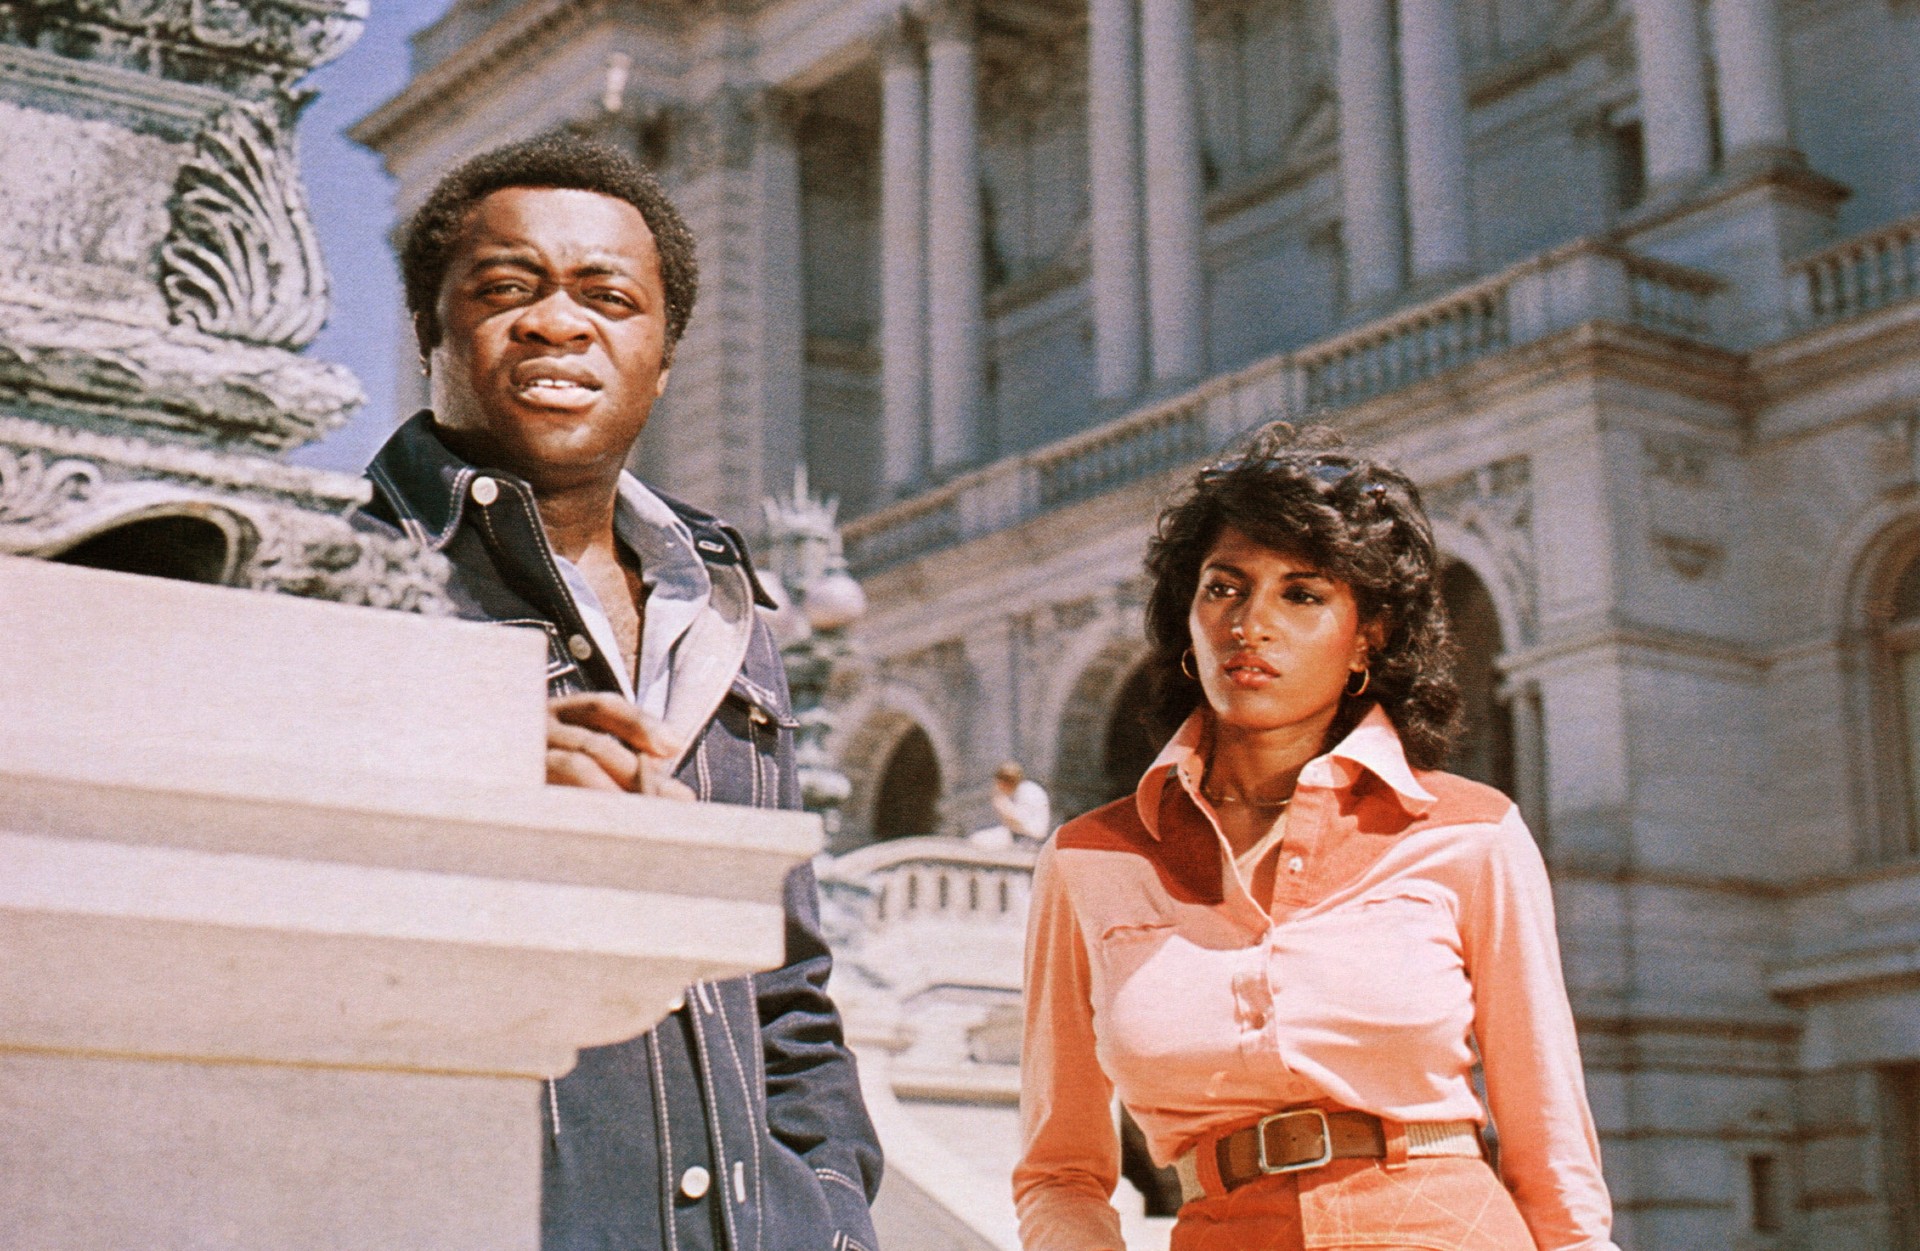 Yaphet Kotto and Pam Grier in Friday Foster